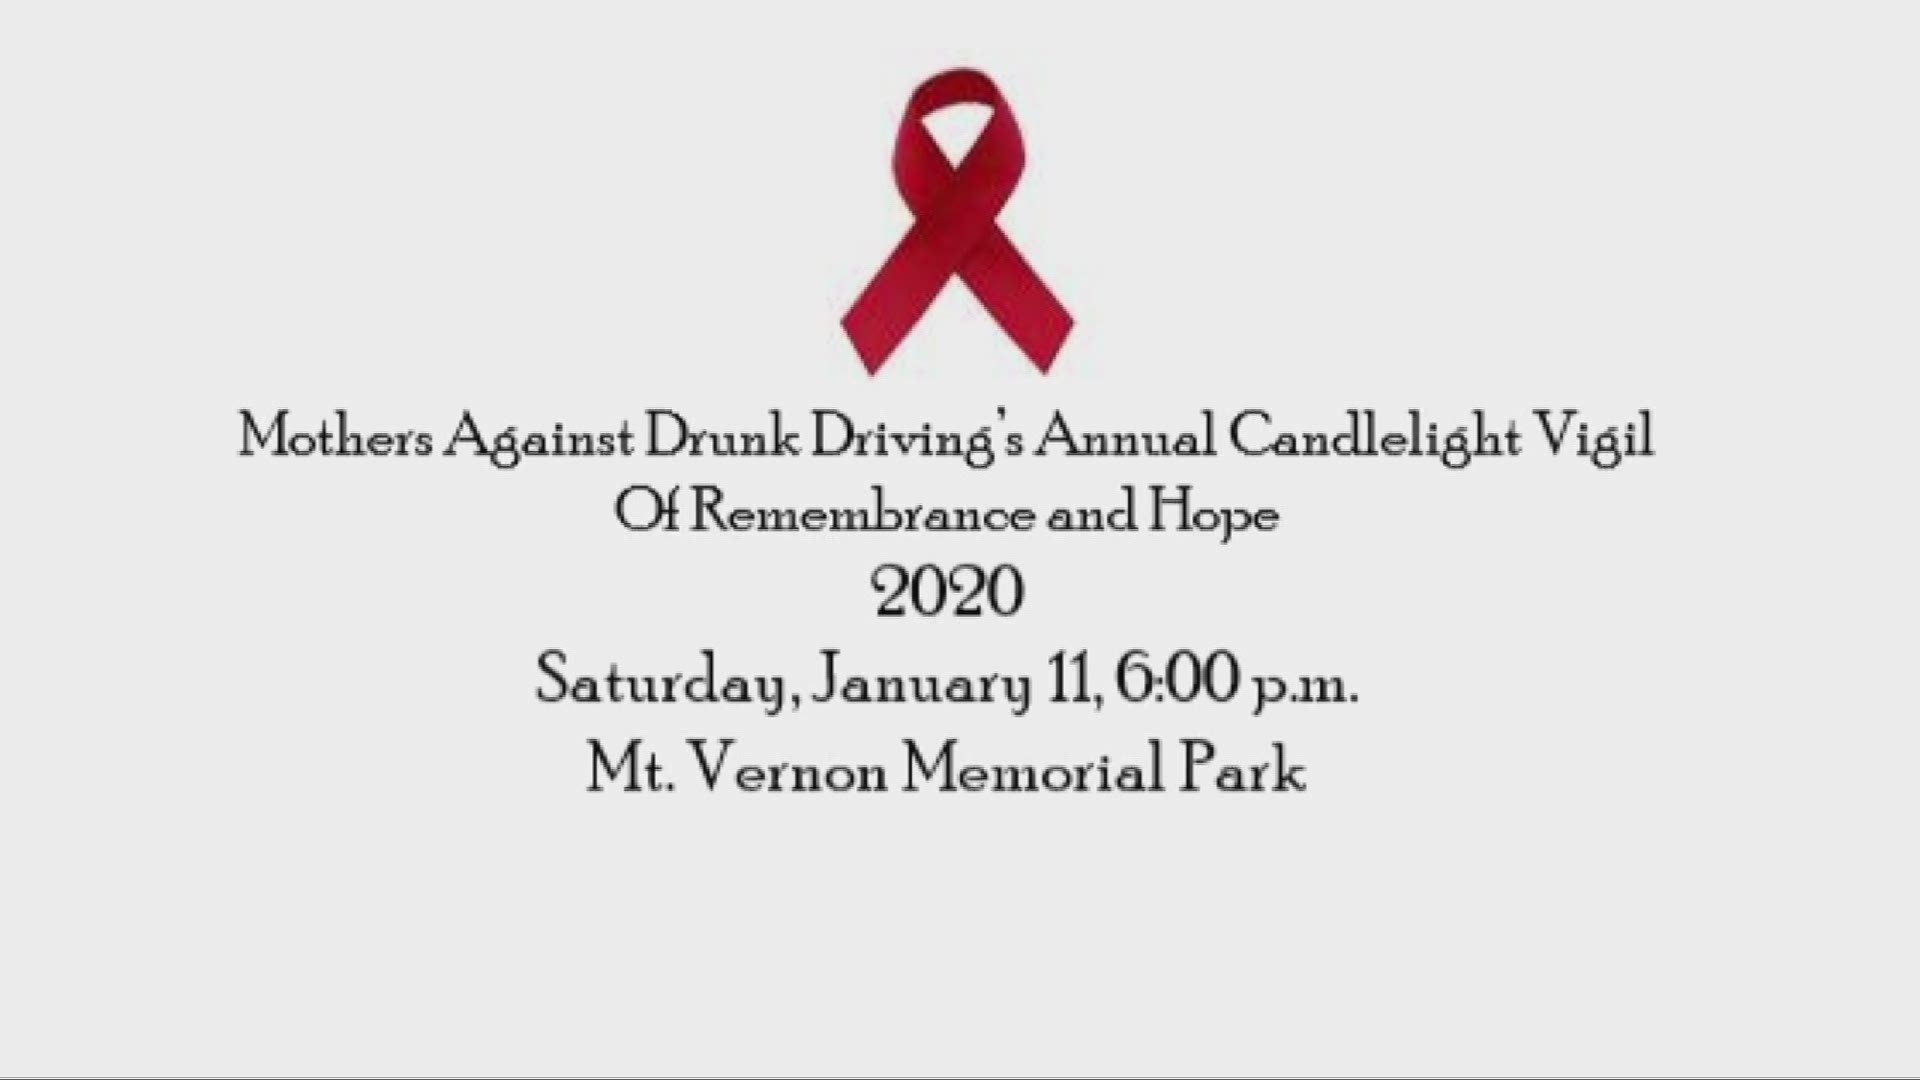 Local families gather to remember the lives lost to DUI crashes on Jan. 11 at Mt. Vernon Memorial Park at 6 p.m.